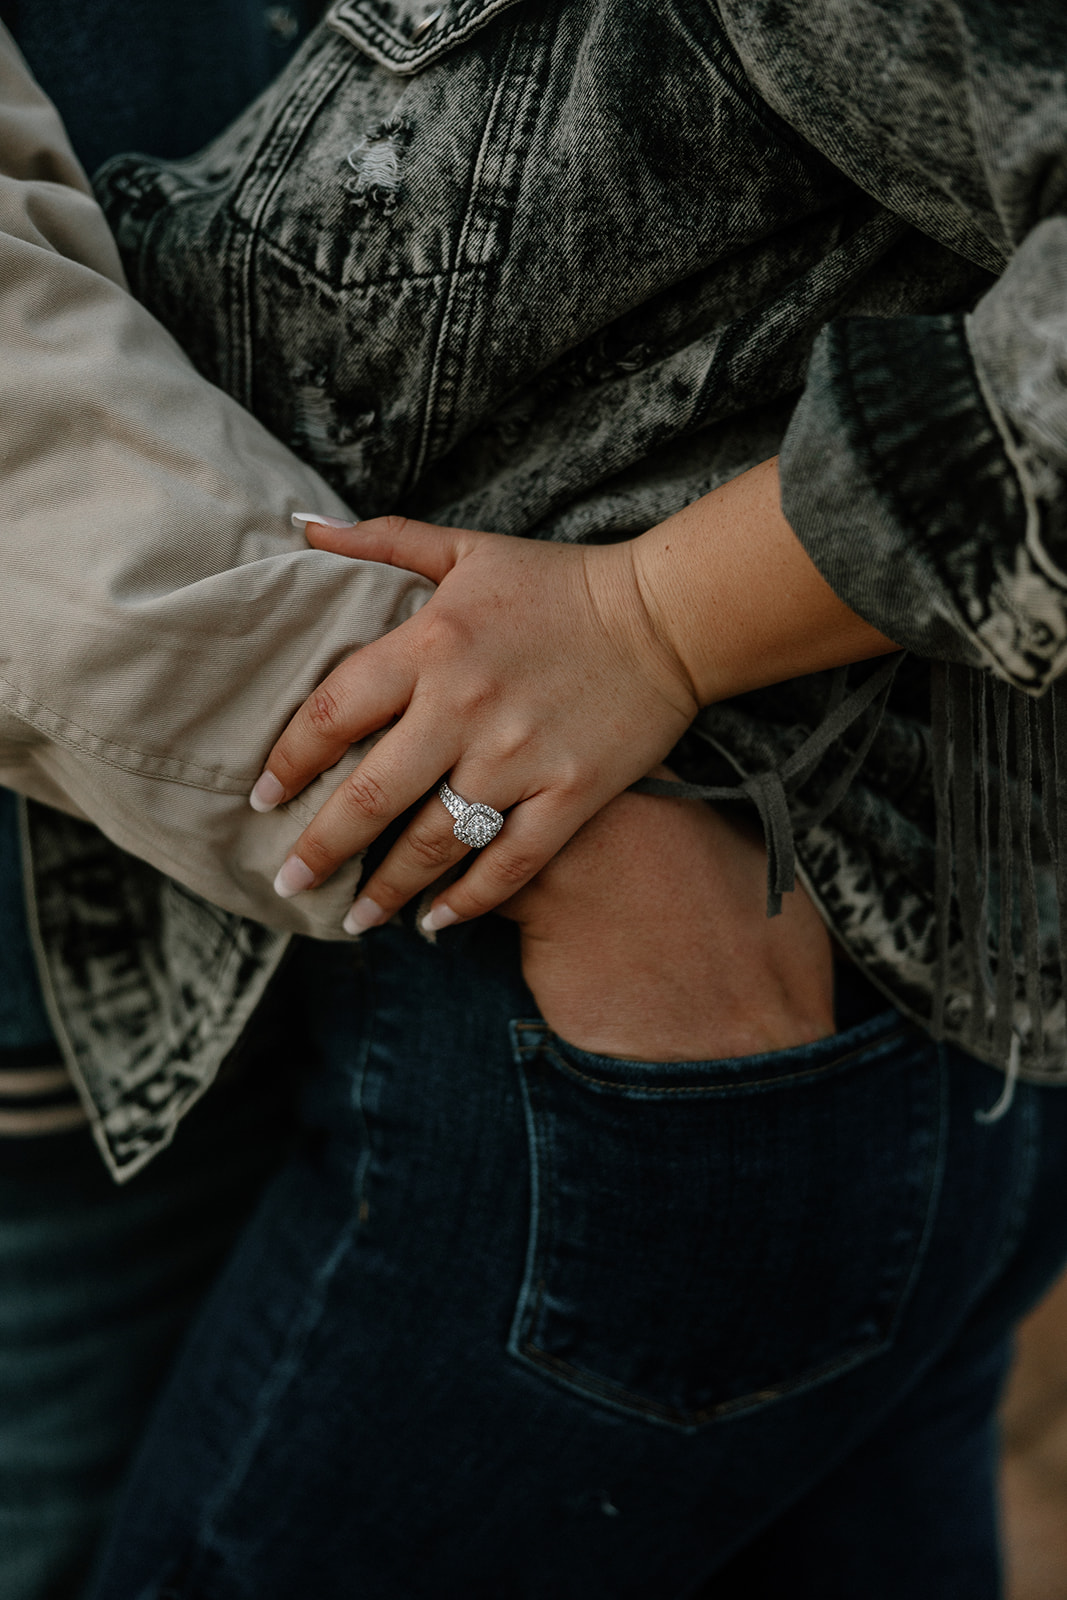 Up close and personal view of a beautiful Arizona couple and her new bling during their winter engagement photoshoot